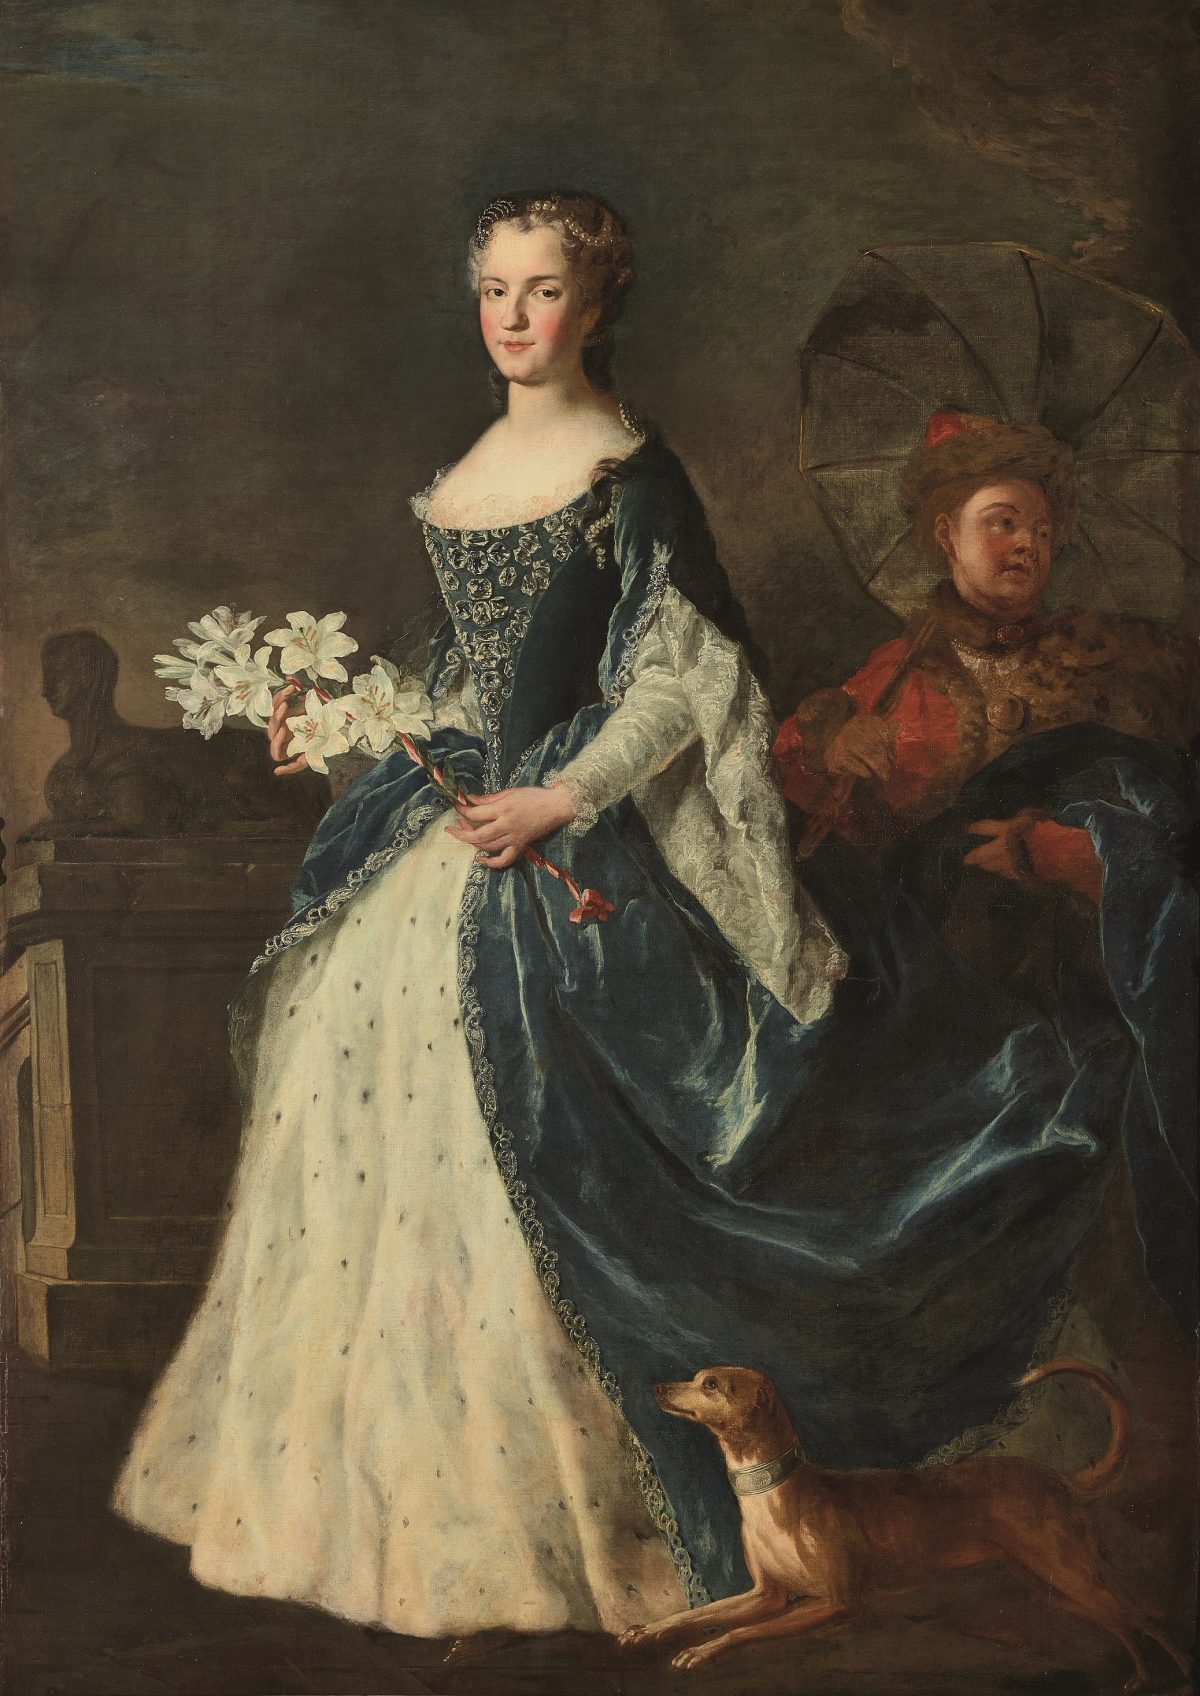 Marie Leszczynska, the queen of France, 1725, by Alexis-Simon Belle. Oil on canvas. National Museum of the Palace of Versailles and the Trianon, Versailles. (Christophe Fouin /Palace of Versailles (RMN-GP))